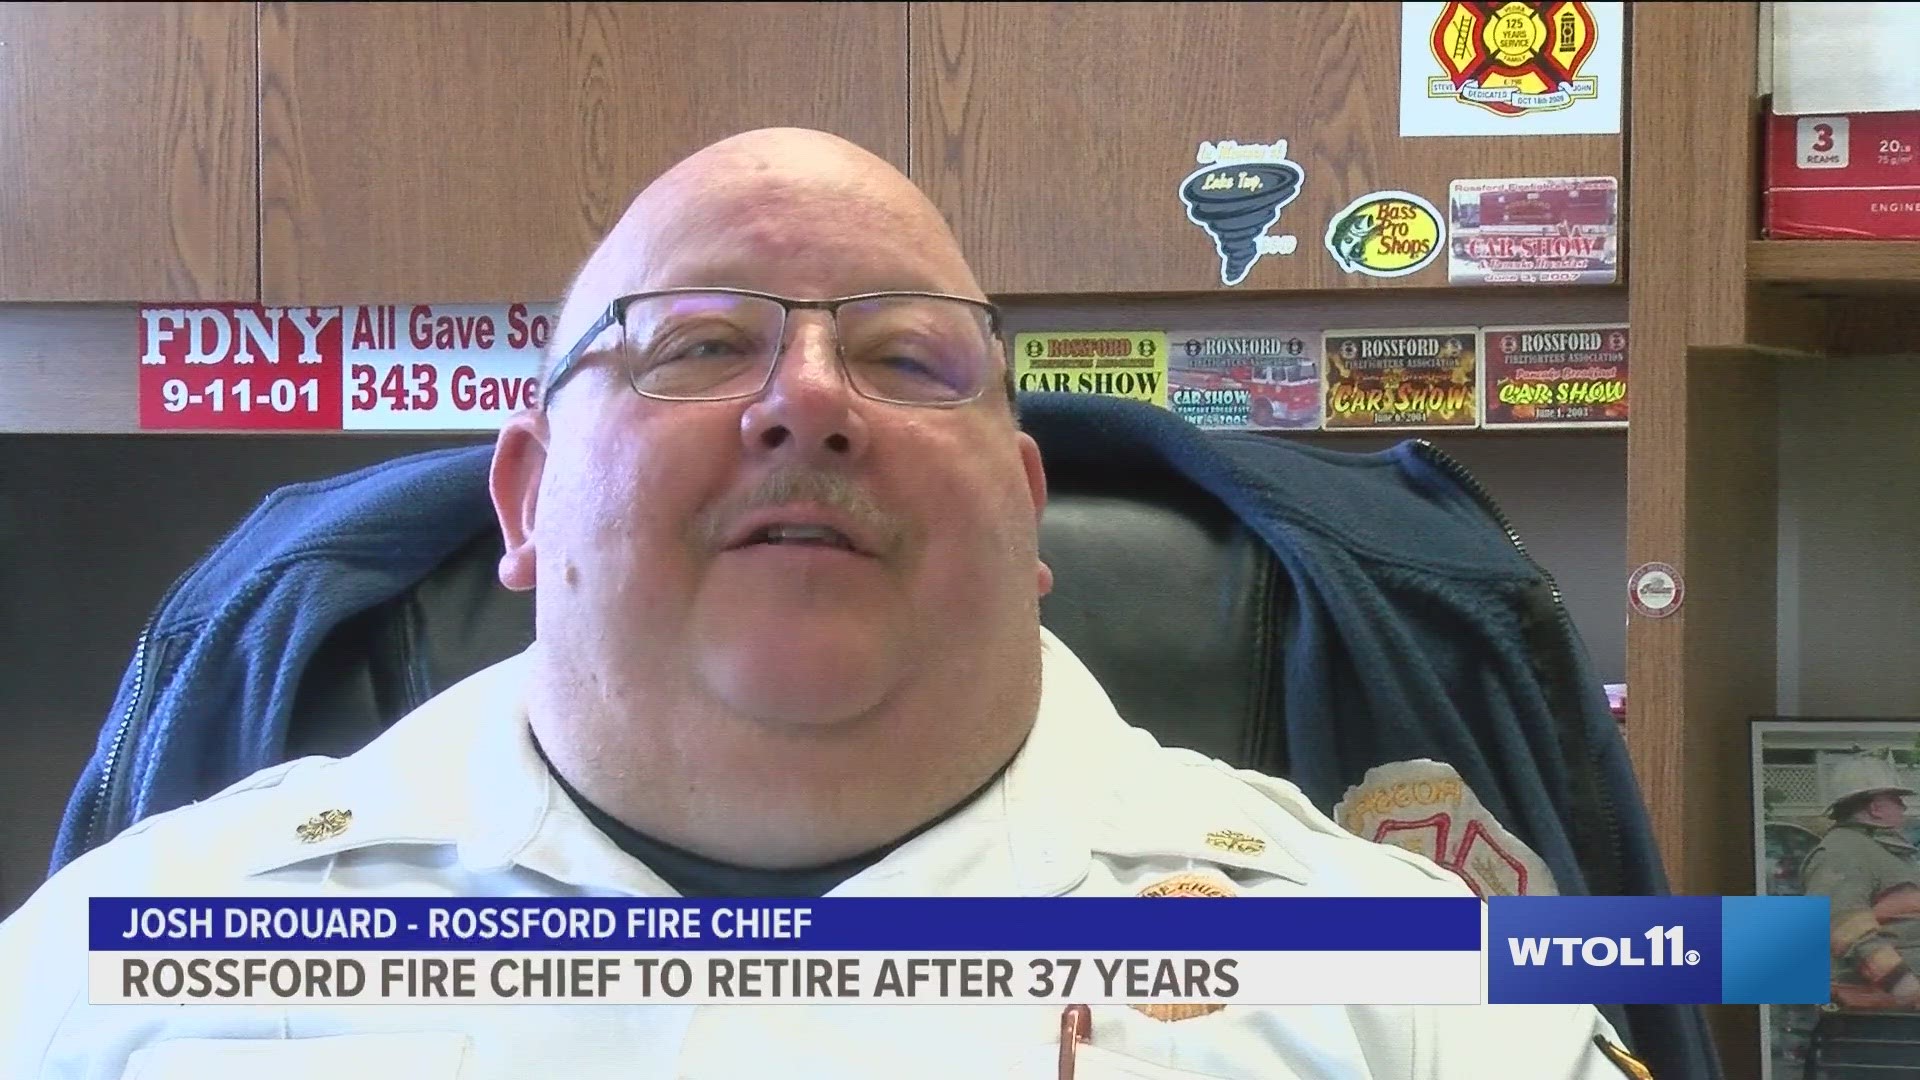 Josh Drouard has been the fire chief in Rossford for 10 years.